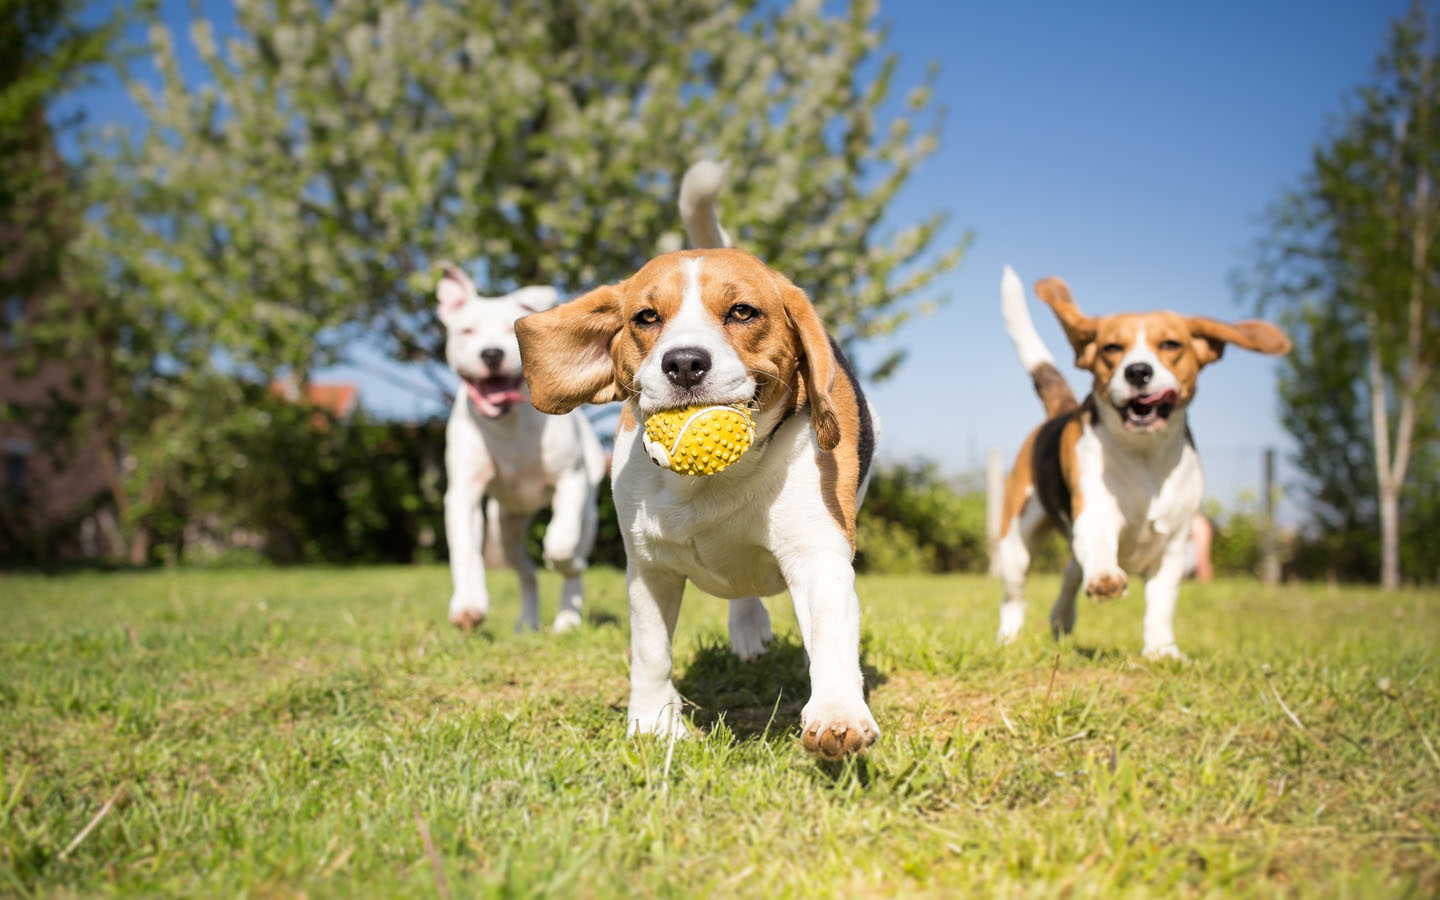 pet-friendly areas in dubai: dogs running with ball